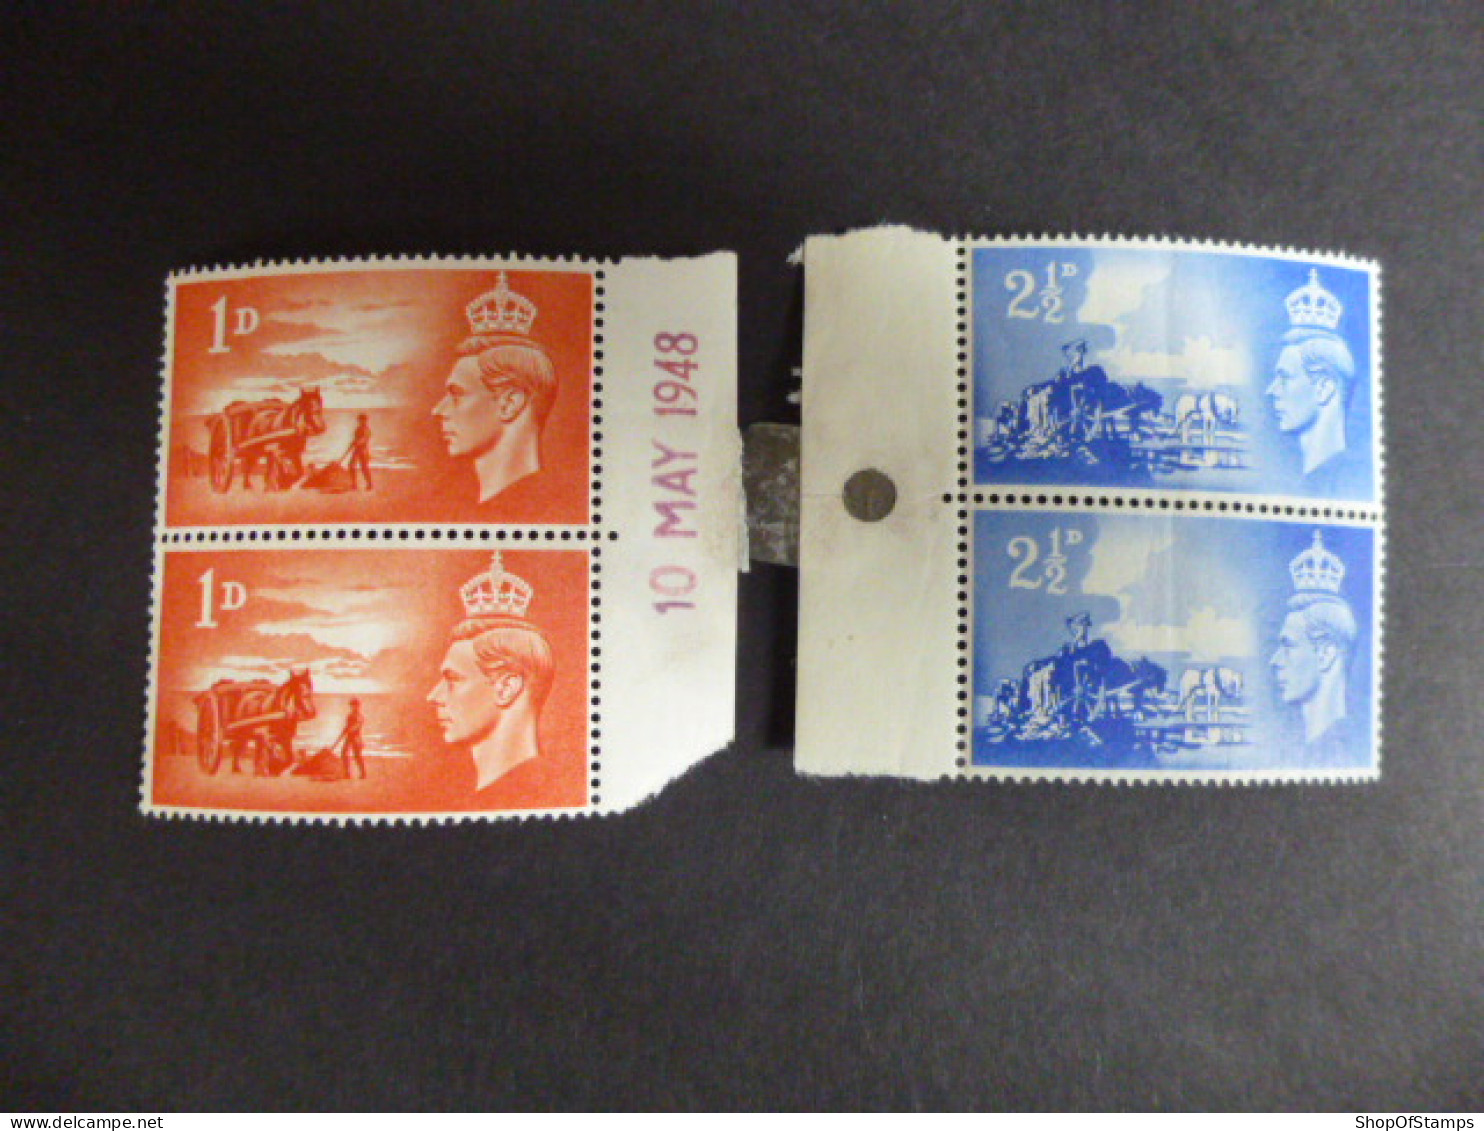 CHANNEL ISLANDS 01-02 MINT PAIR WITH ISSUE DATE STAMP - Non Classificati